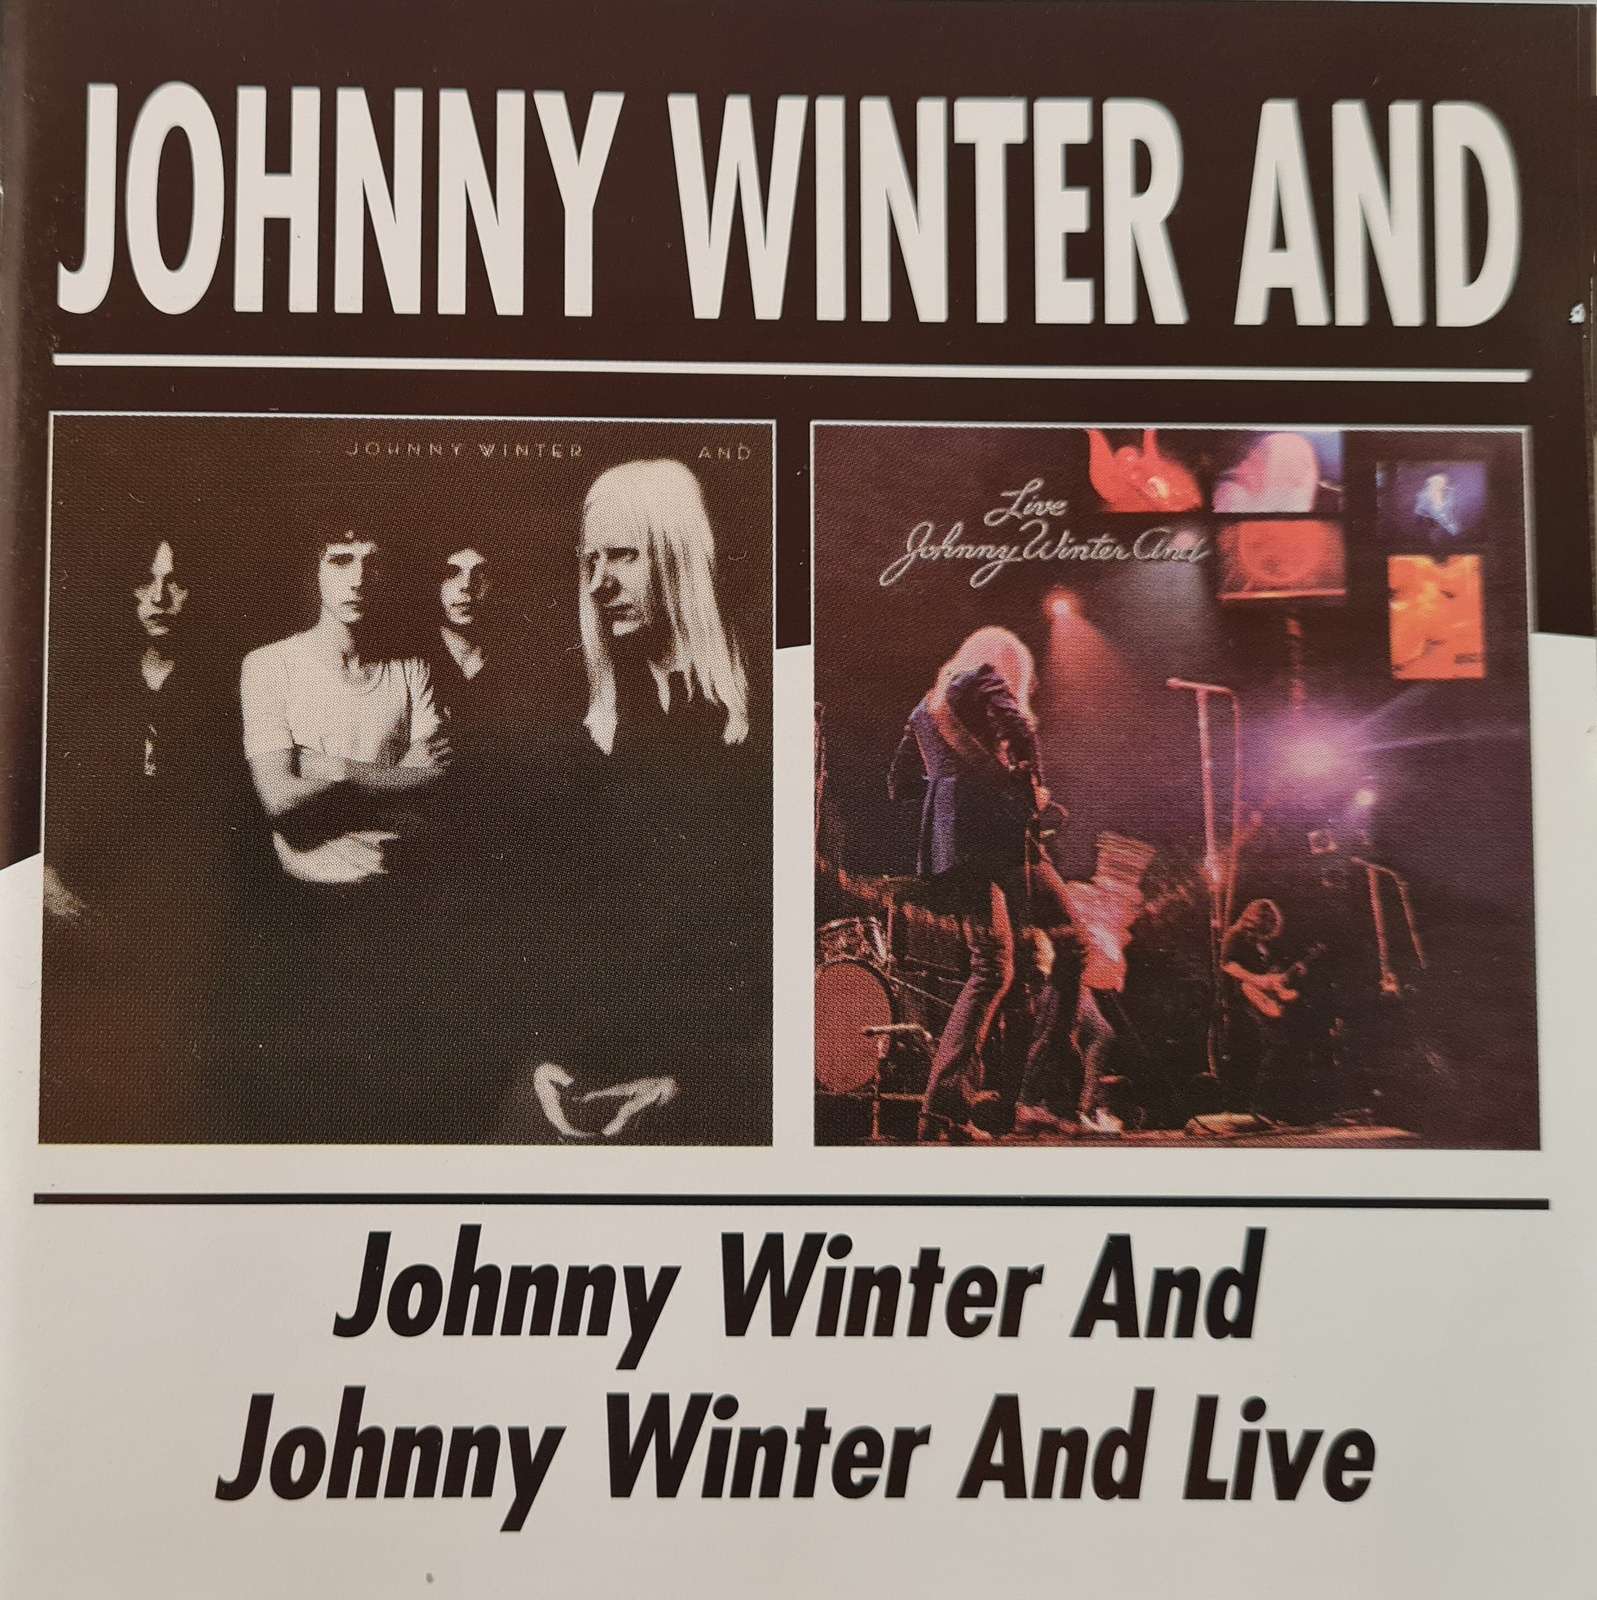 Johnny Winter And - Johnny Winter And / Johnny Winter And Live (CD)